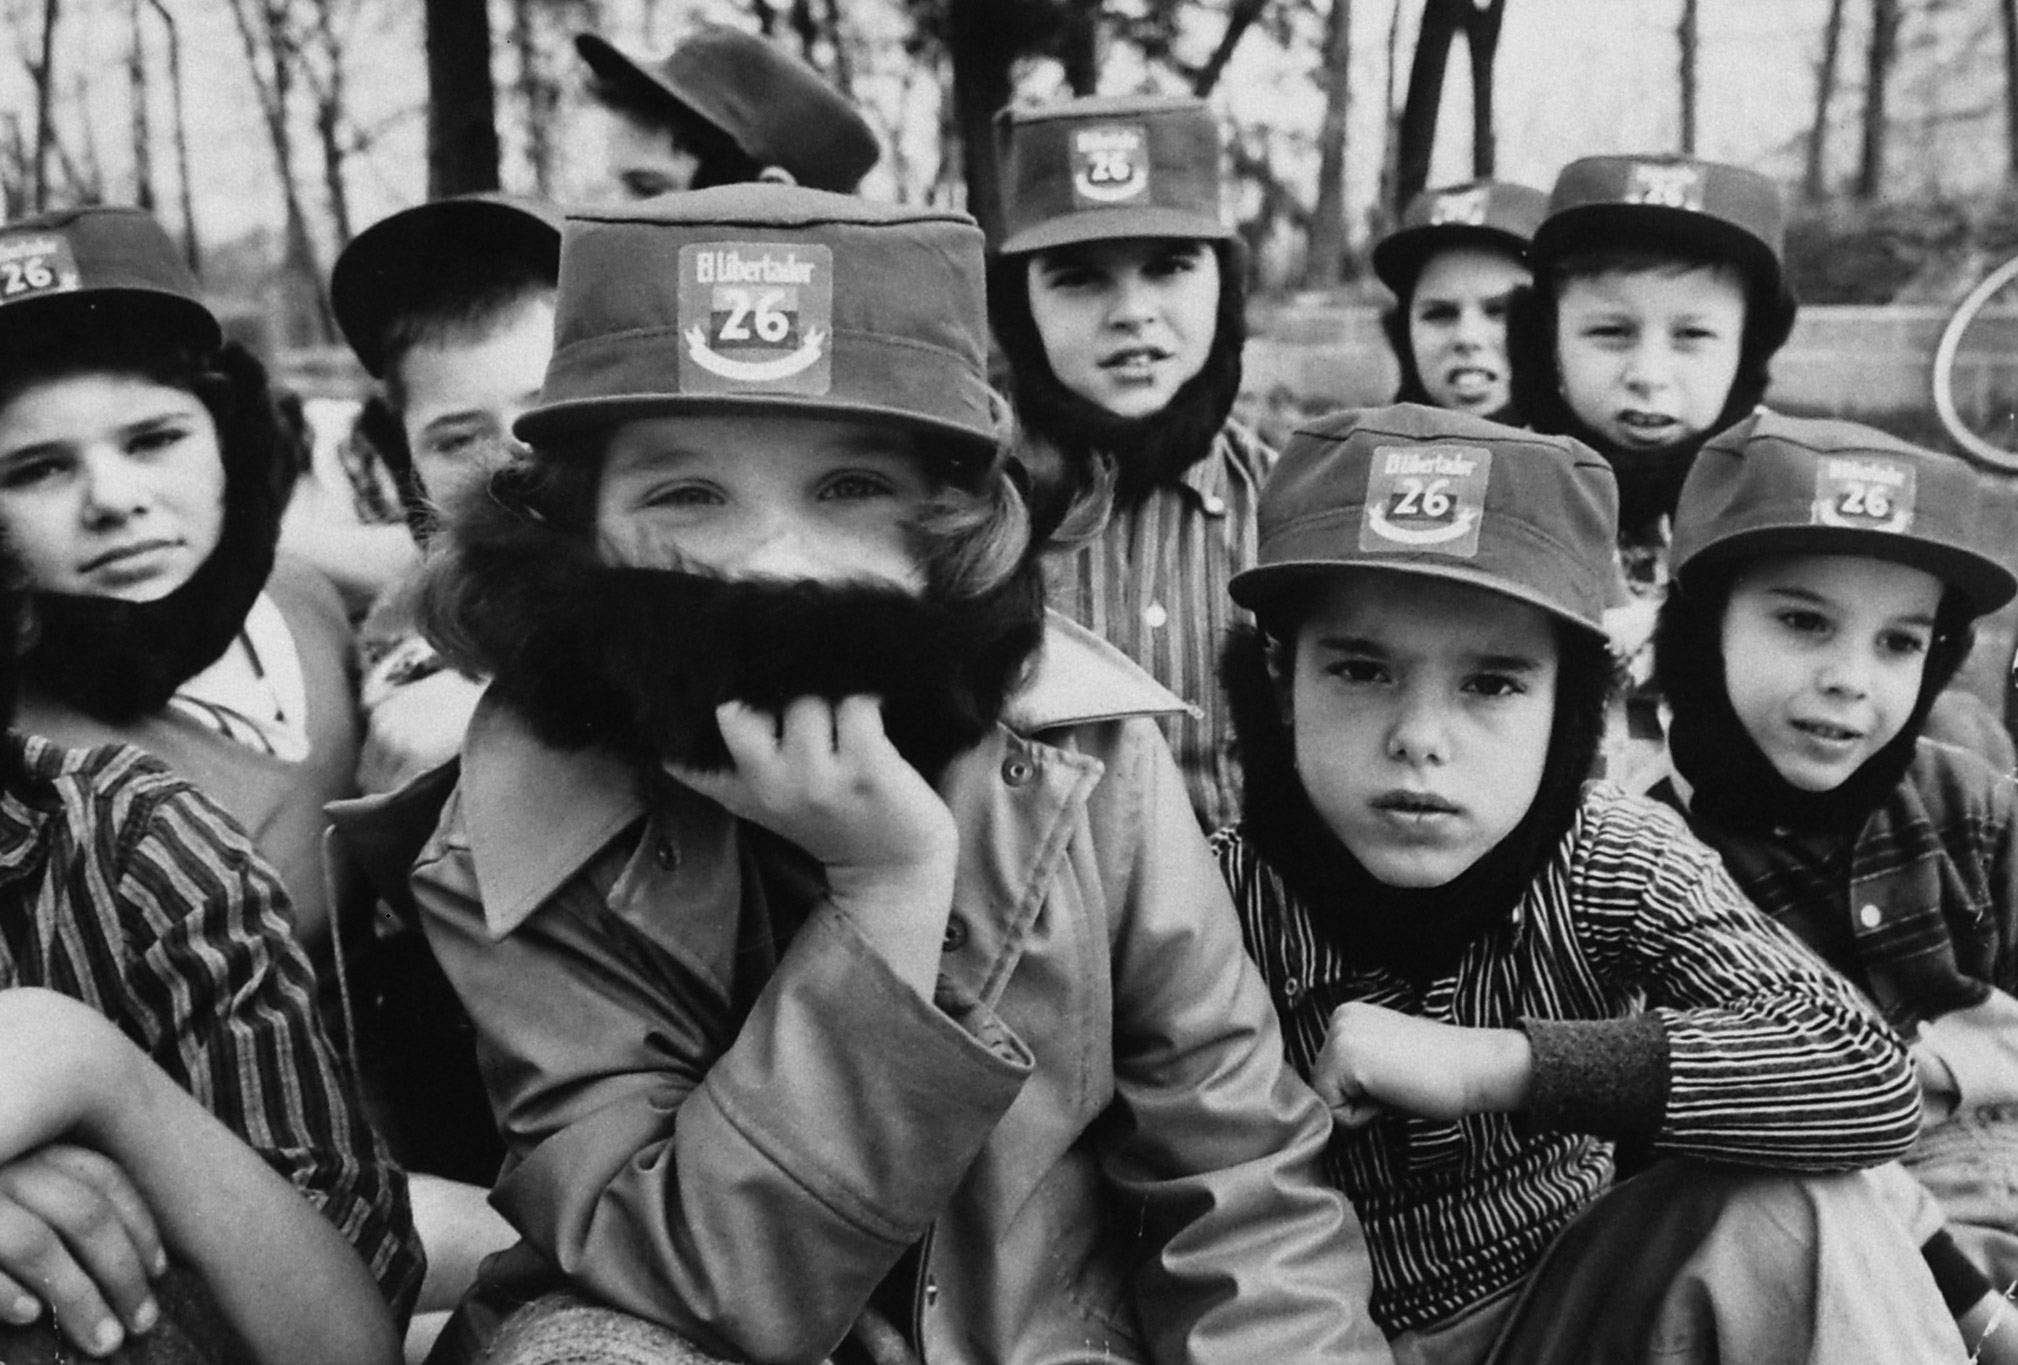 Children wearing Fidel Castro beards and hats, playing in the woods in 1959.